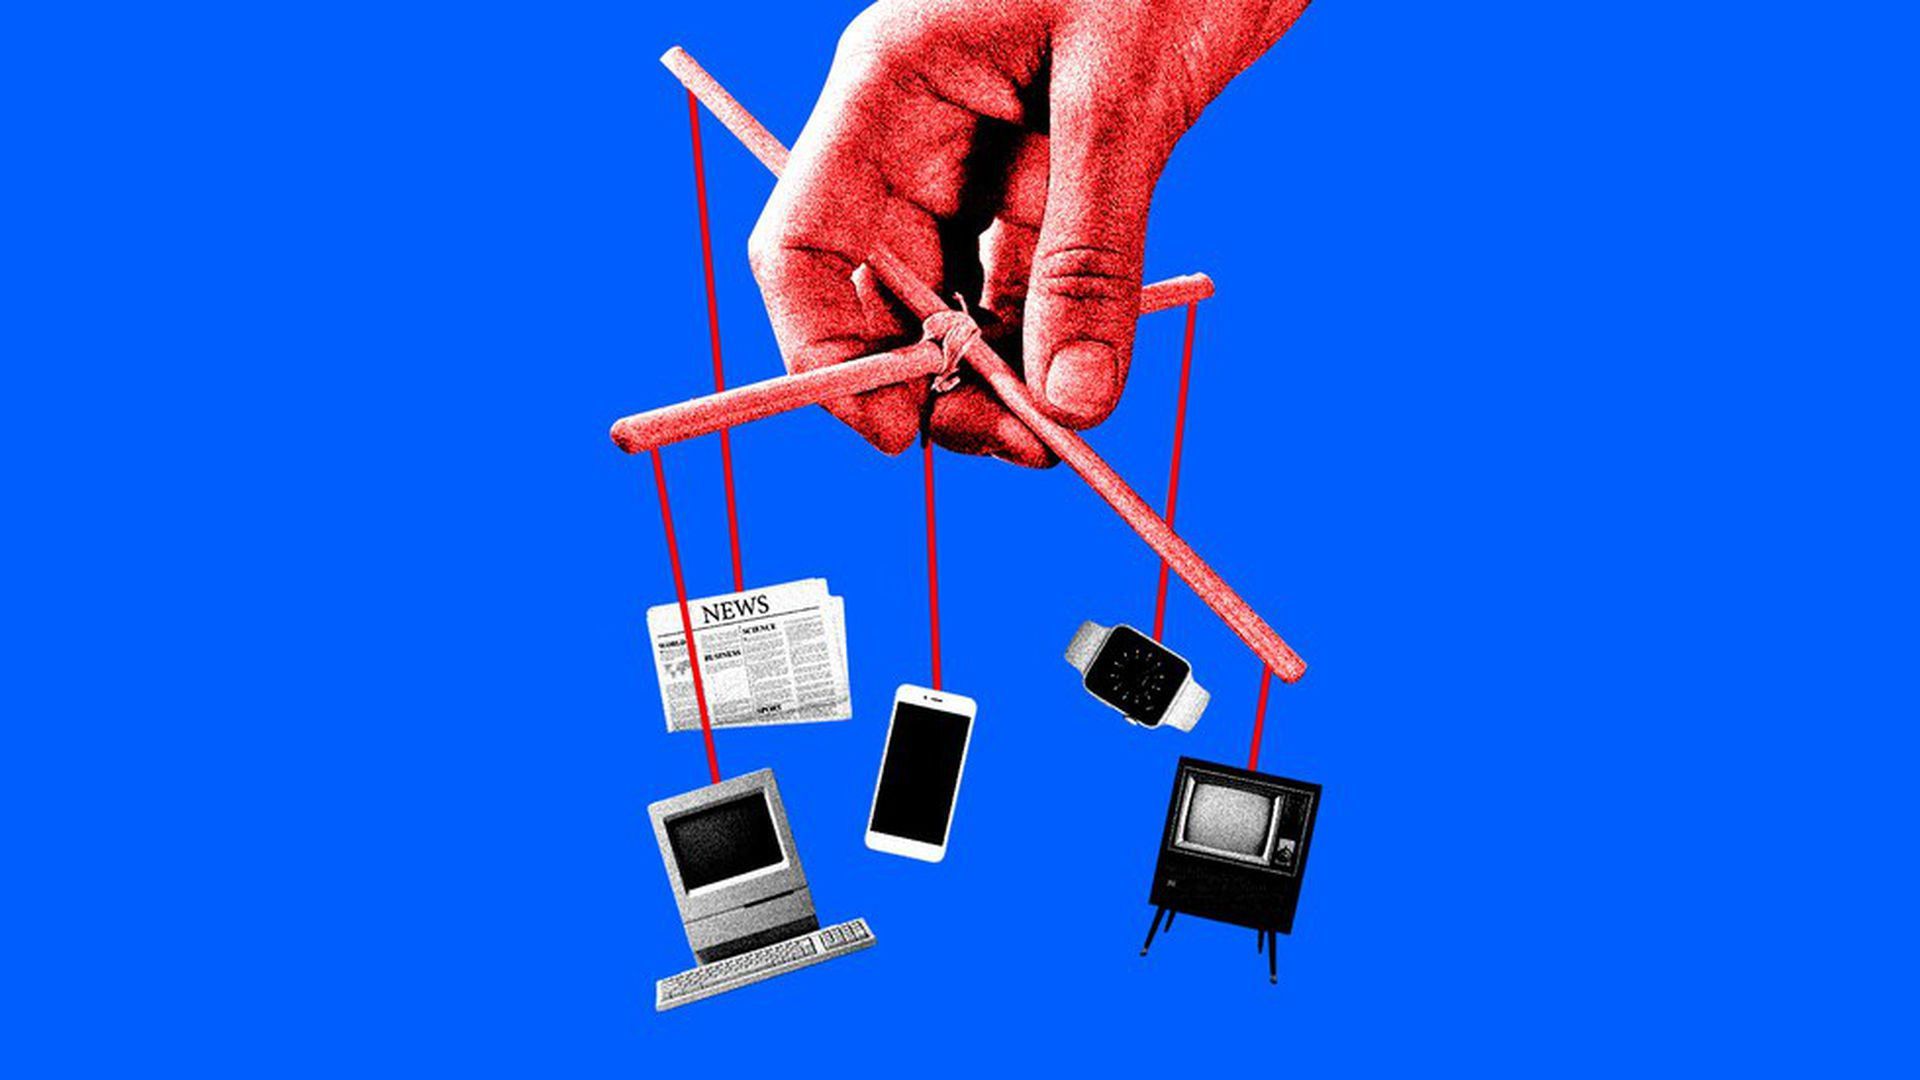 Hand dangling puppet strings holding various forms of media like TV and newspaper